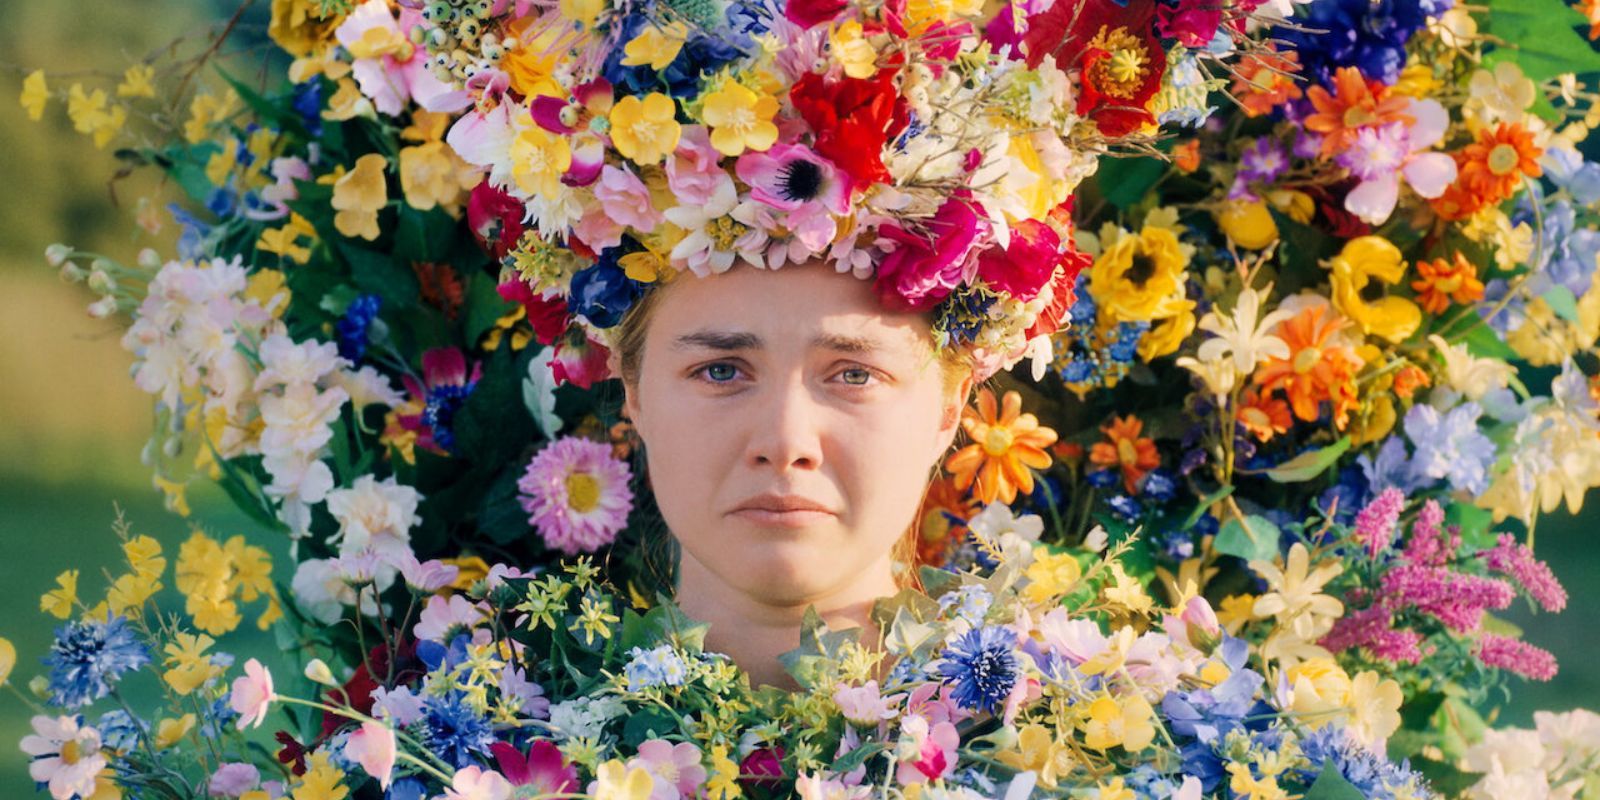 Florence Pugh as the May queen in Midsommar